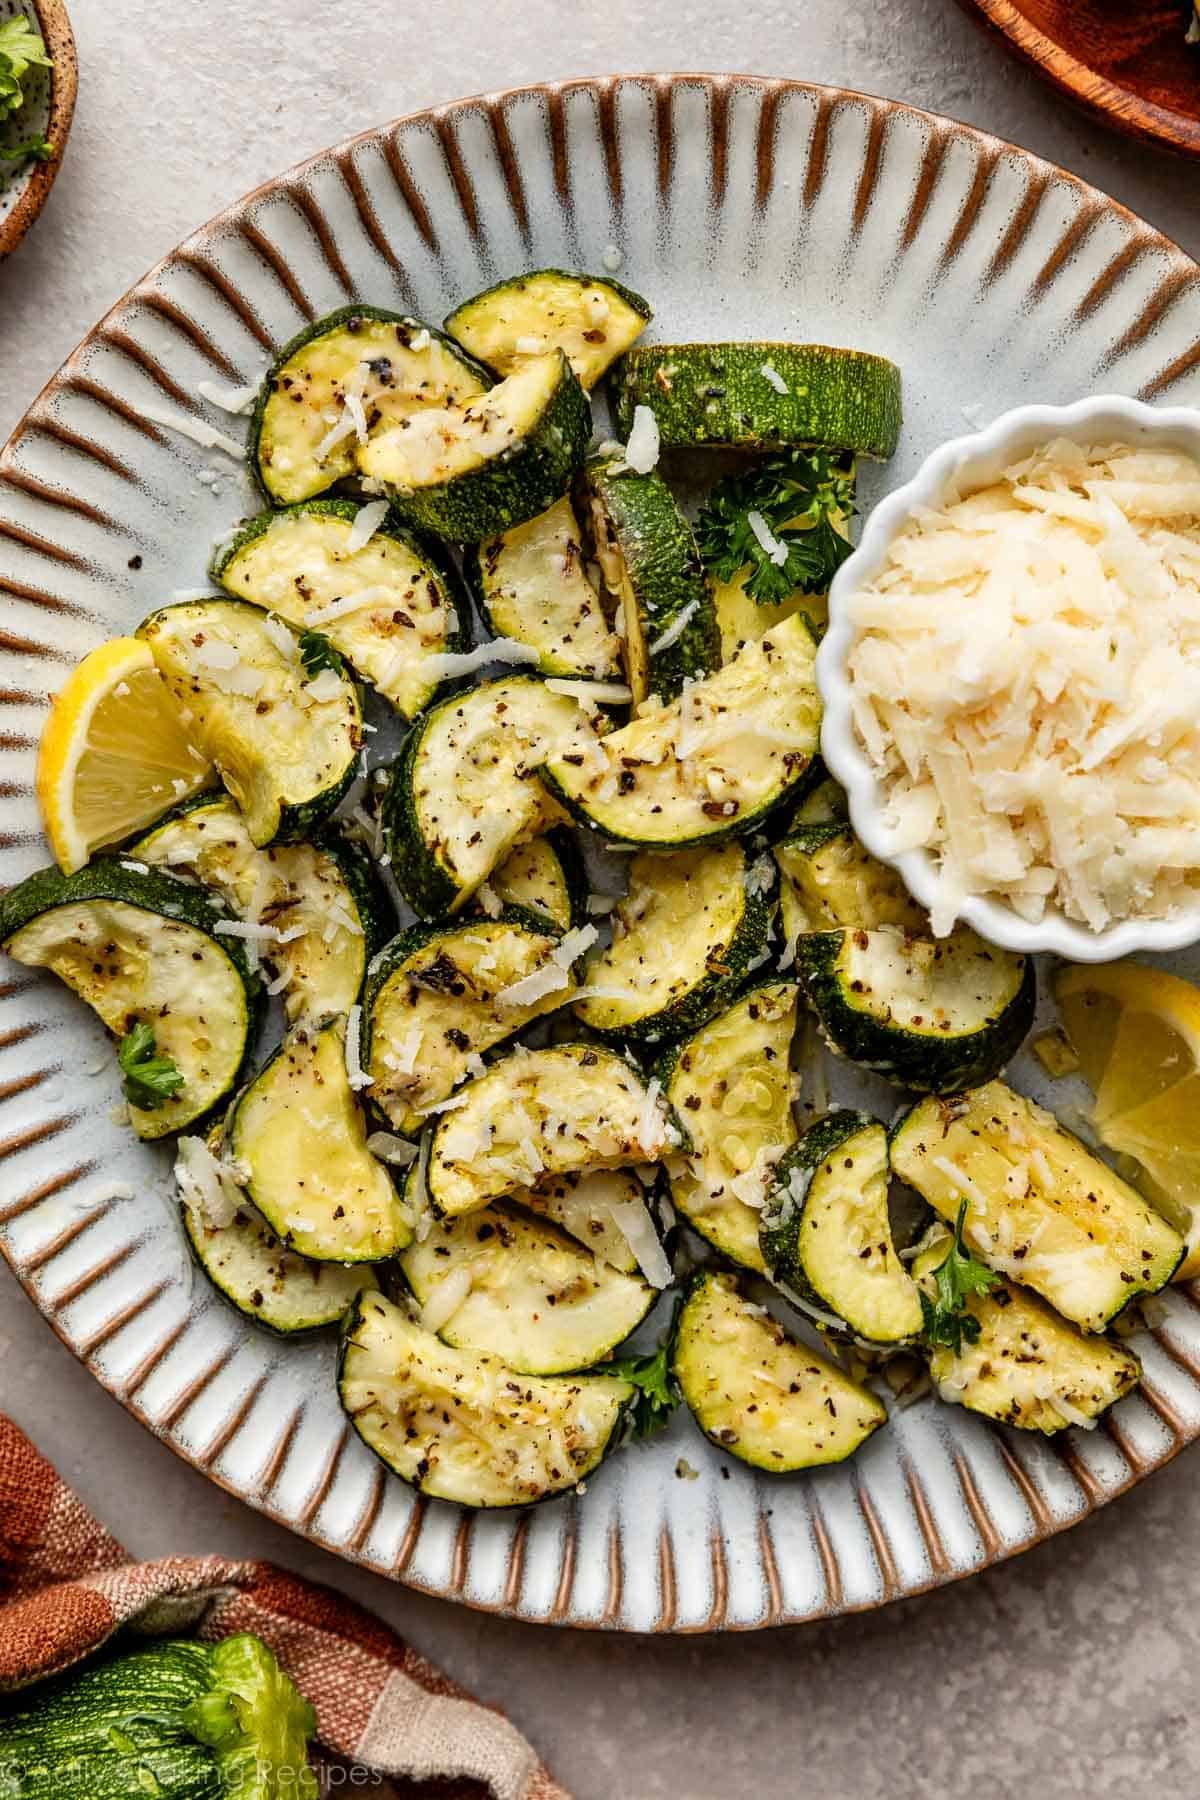 roasted lemon garlic zucchini pieces with parmesan on top.